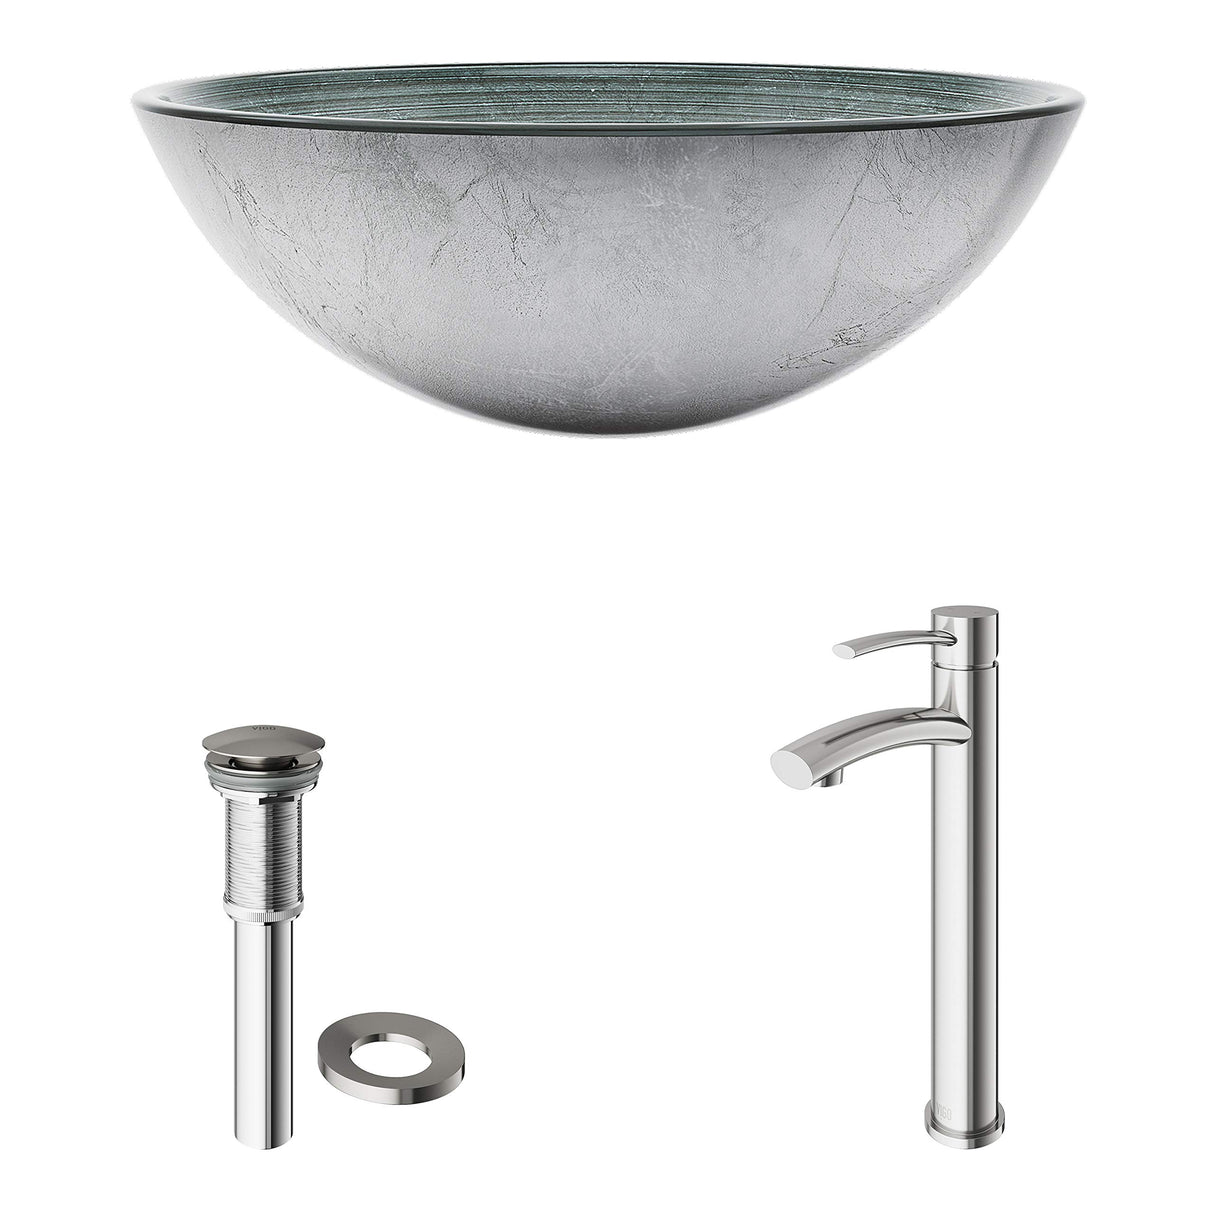 VIGO VGT1062 16.5" L -16.5" W -12.5" H Handmade Glass Round Vessel Bathroom Sink Set in Simply Silver Finish with Brushed Nickel Single-Handle Single Hole Faucet and Pop Up Drain